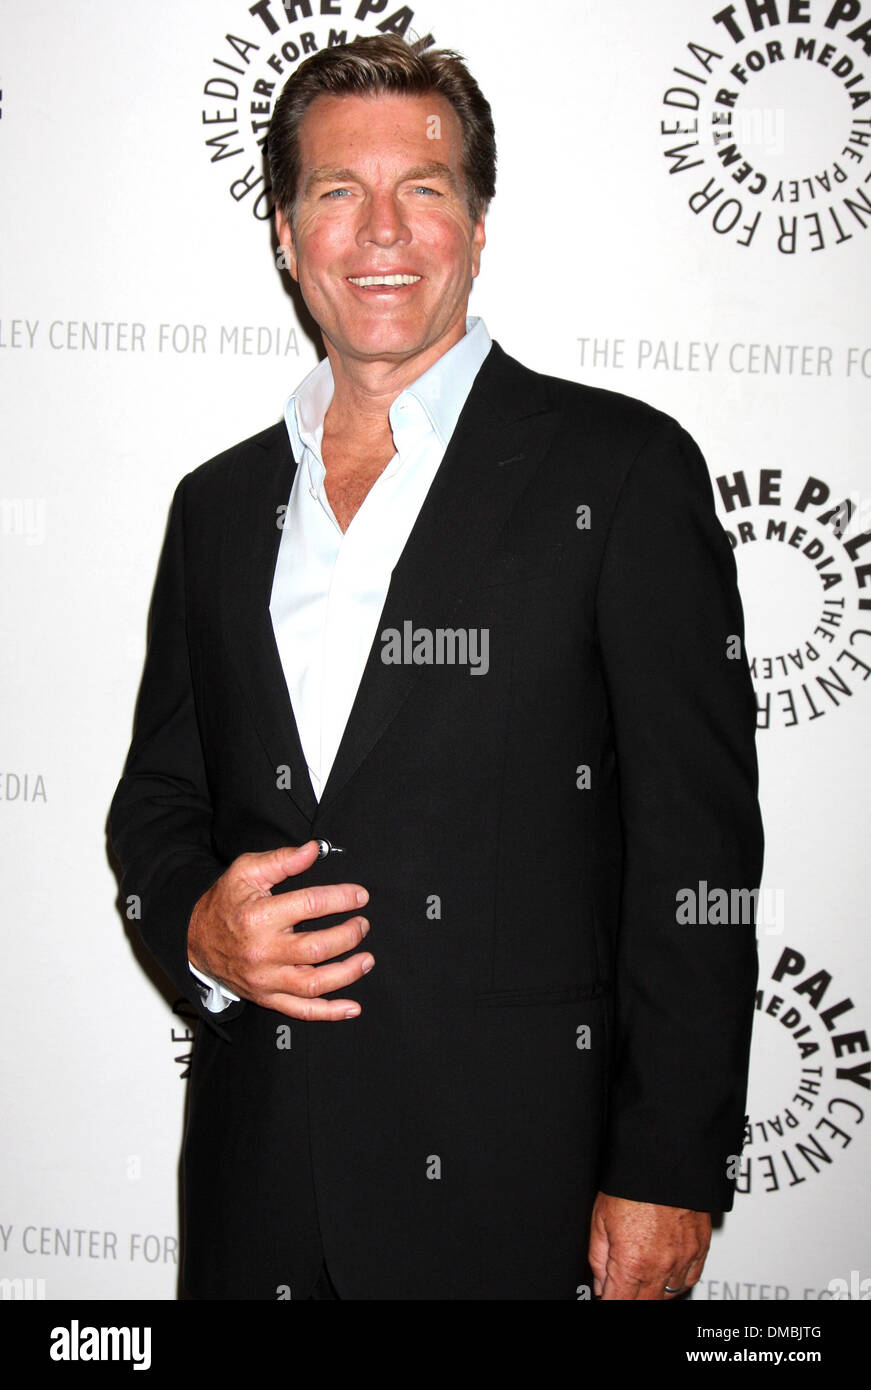 Peter Bergman 'The Young & Restless' celebrate 10,000 episodes at Paley ...